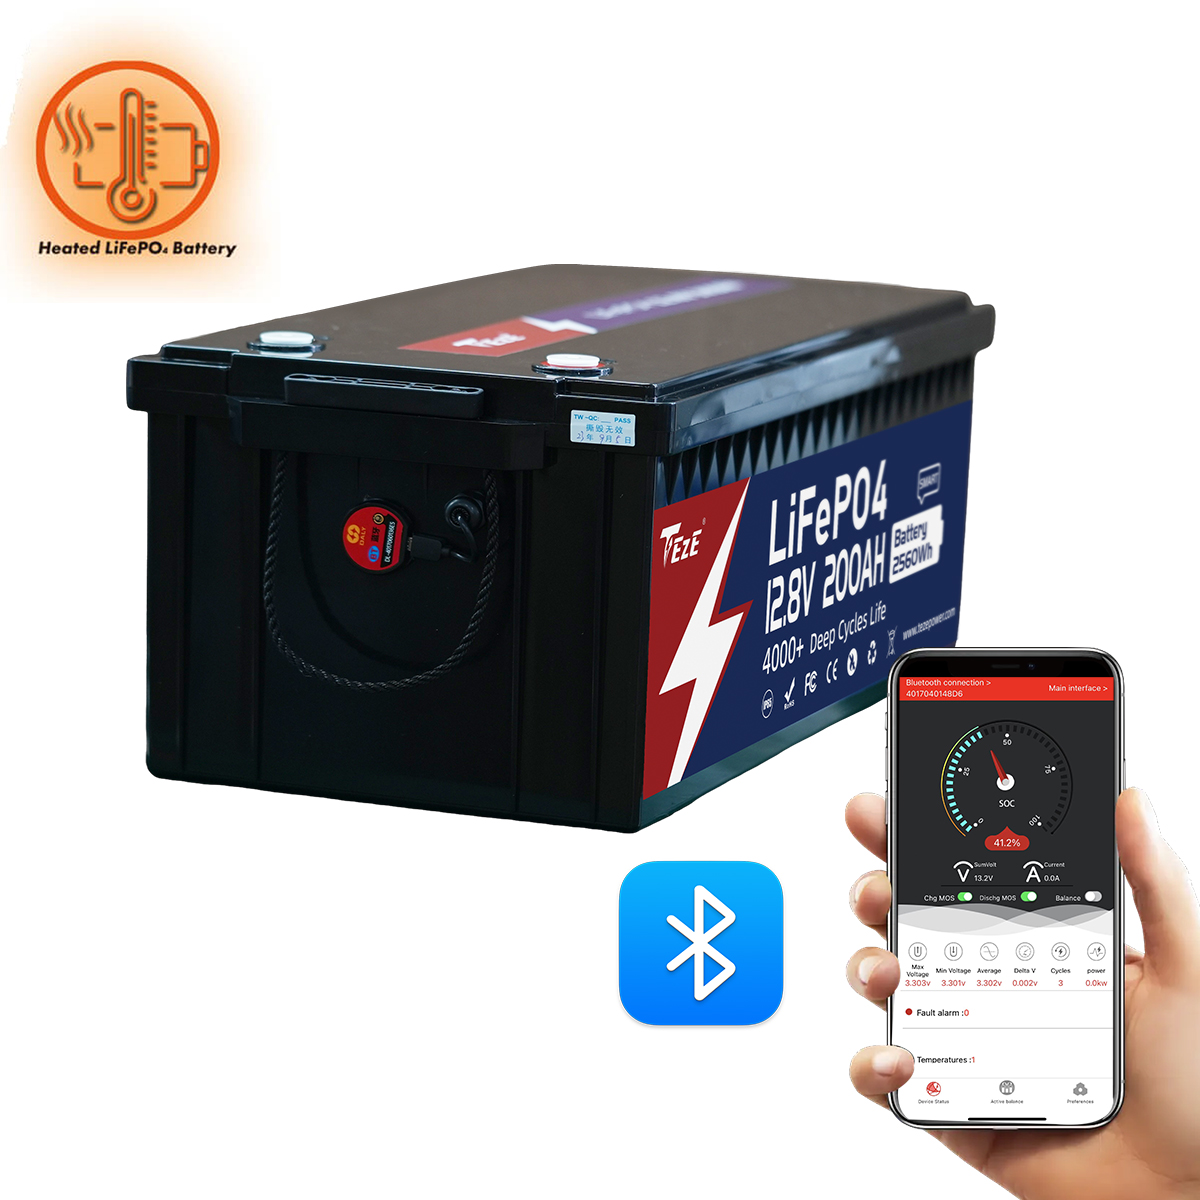 NEW-TezePower 12V200Ah LiFePO4 Battery with Bluetooth, Self-heating and Active Balancer, Built-in 200A Daly BMS (Bluetooth External Version)-TezePower